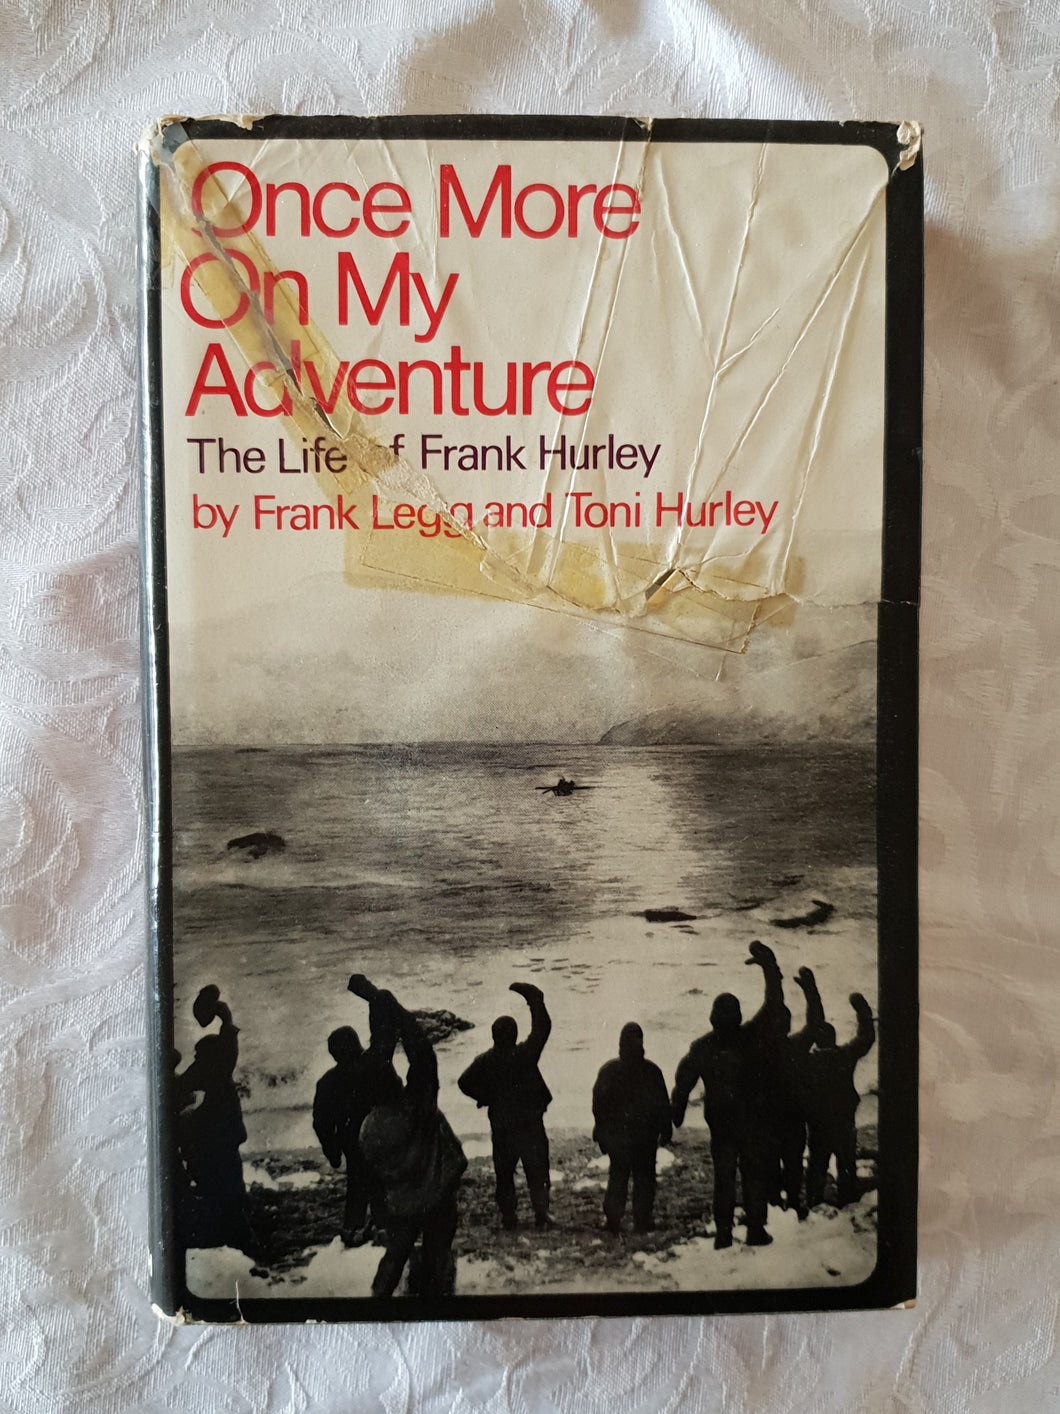 Once More On My Adventure by Frank Legg and Toni Hurley